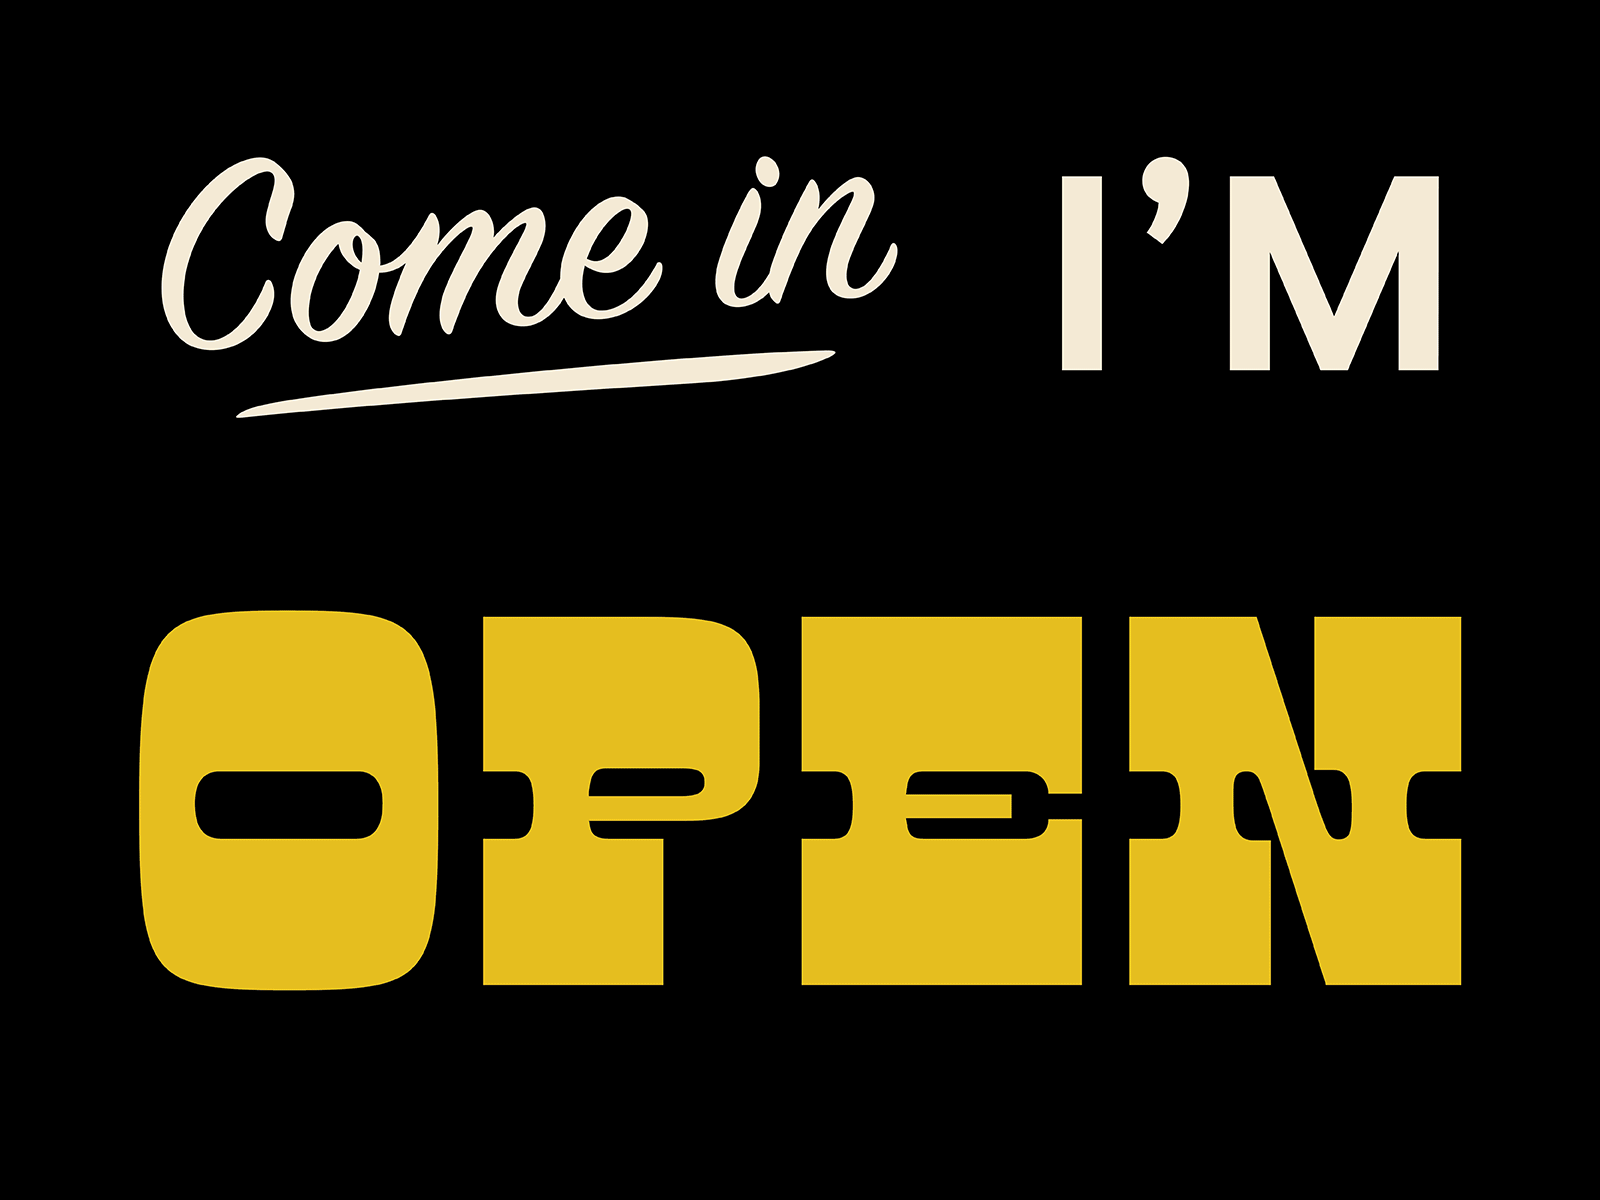 Come On In!